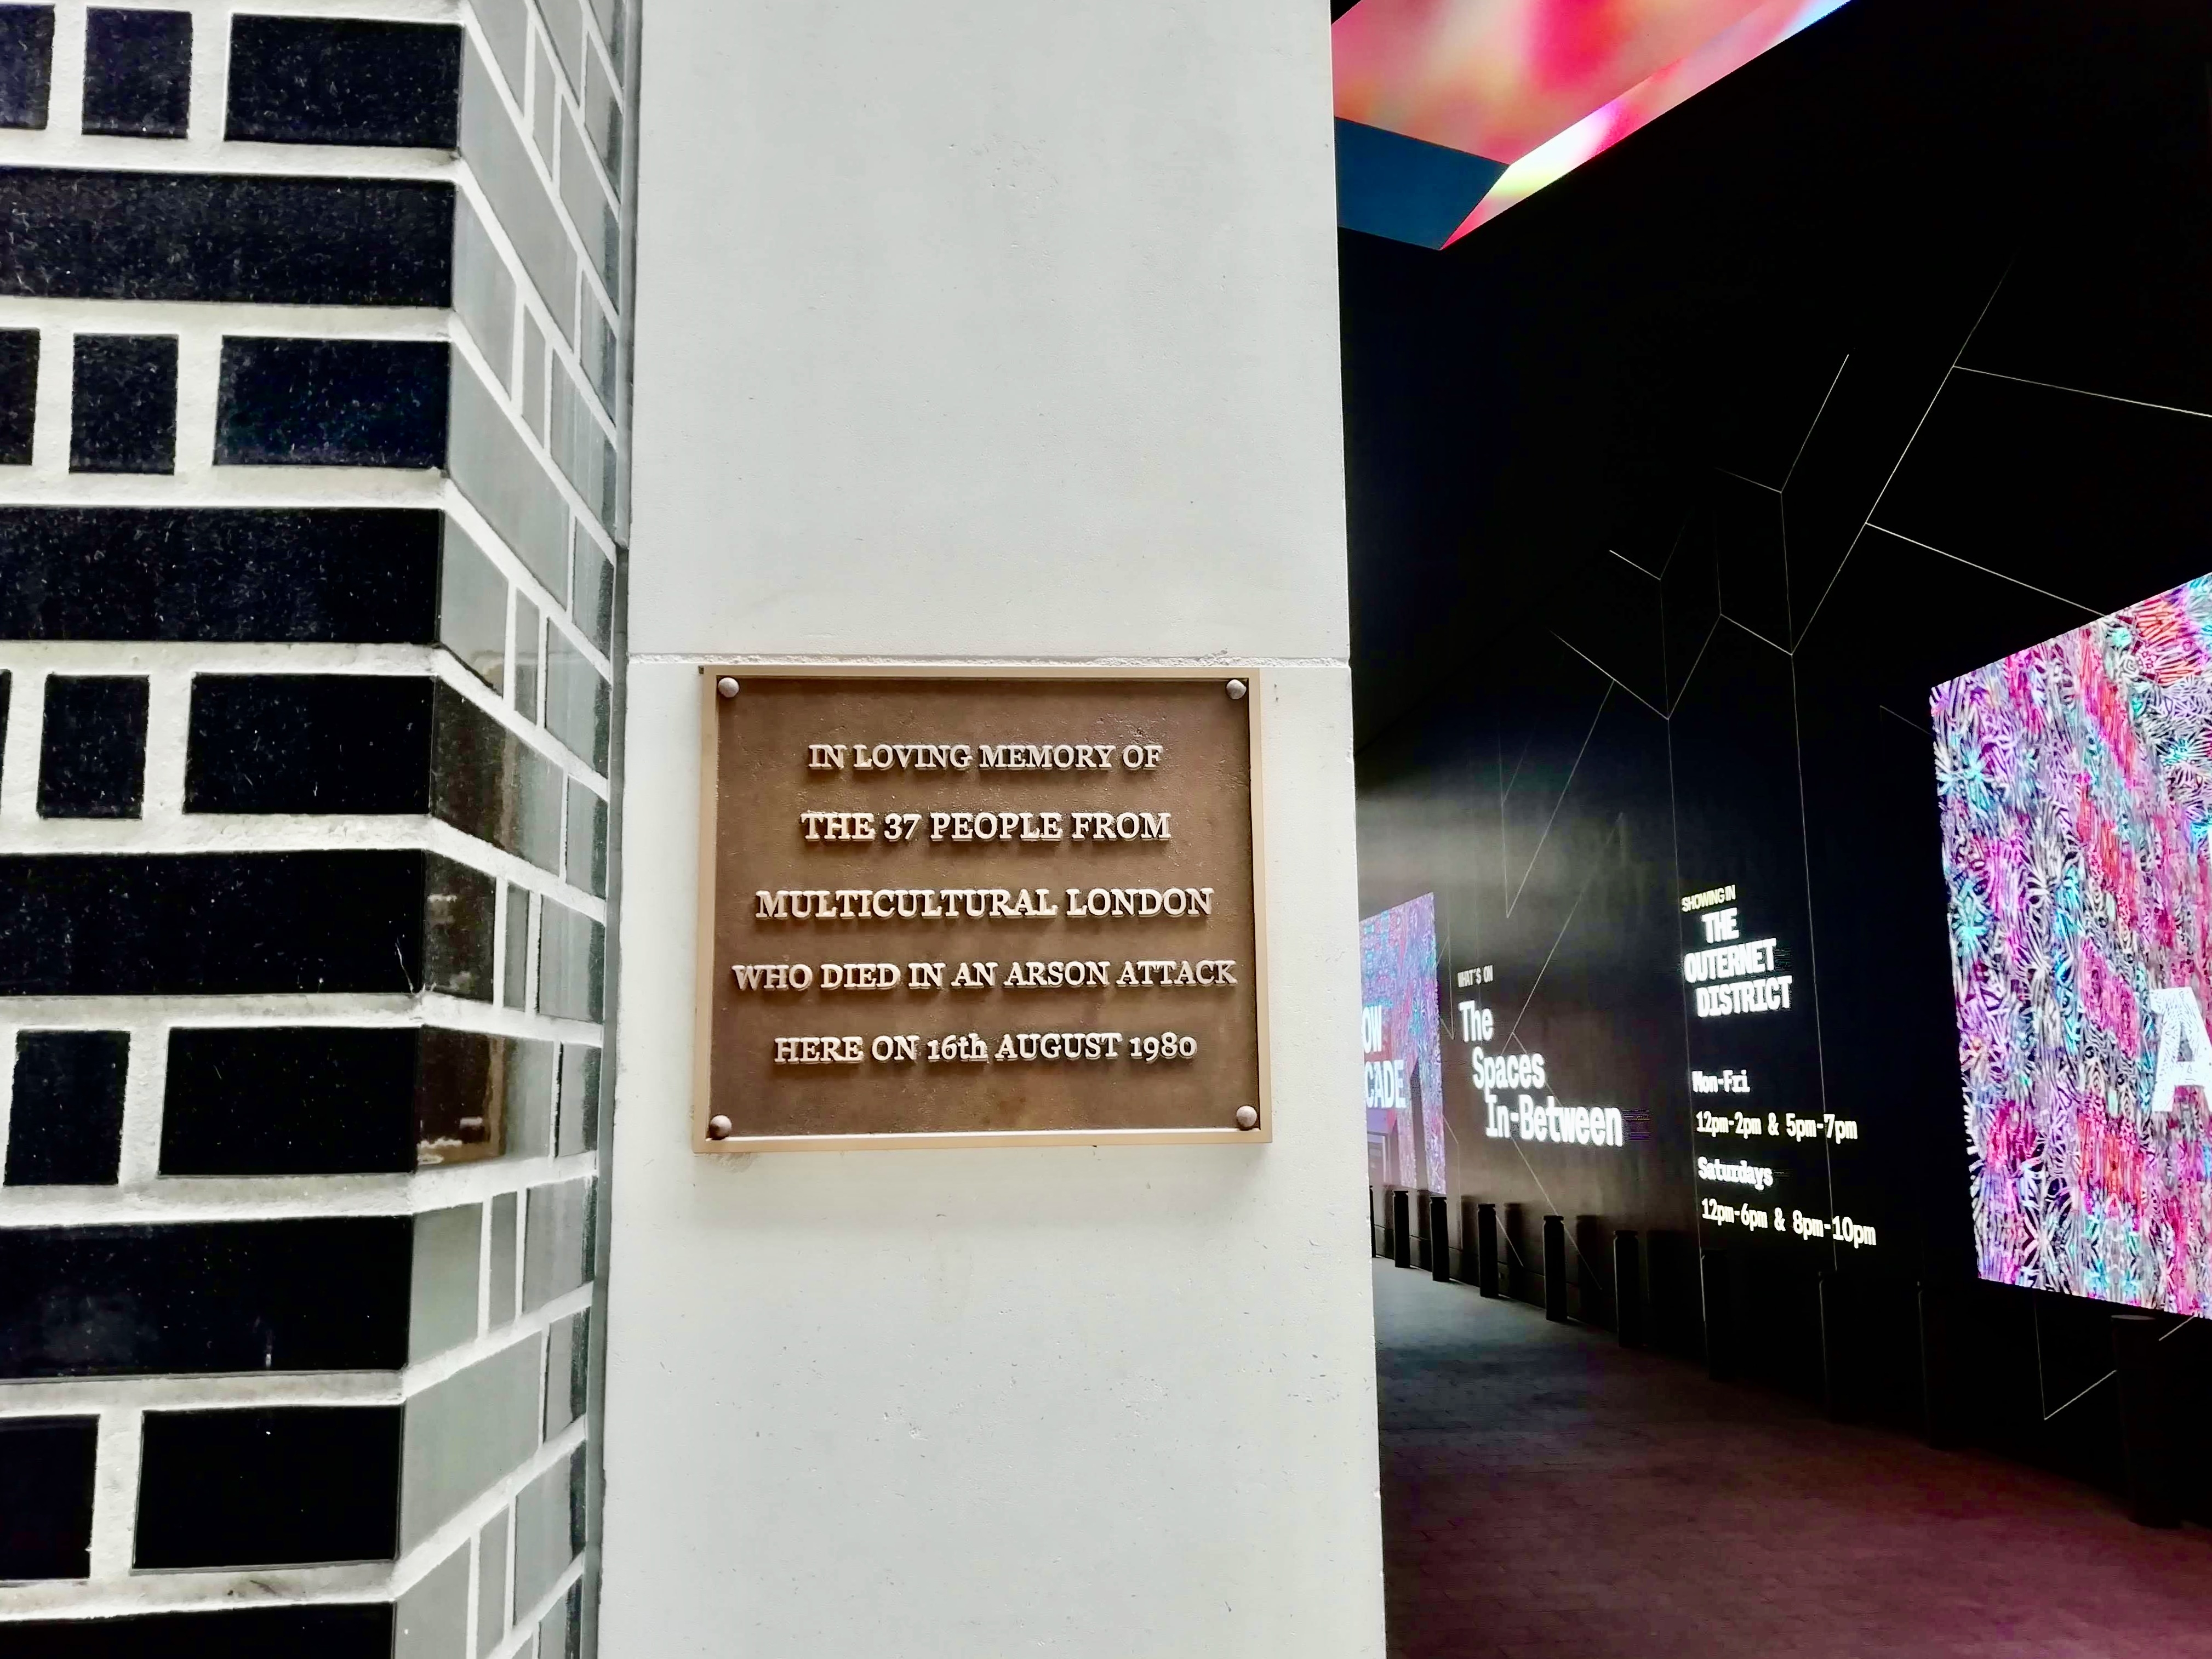 The_Denmark_Place_fire_Plaque_honouring_the_37_people_who_tragically_lost_their_lives_in_an_ar...jpg